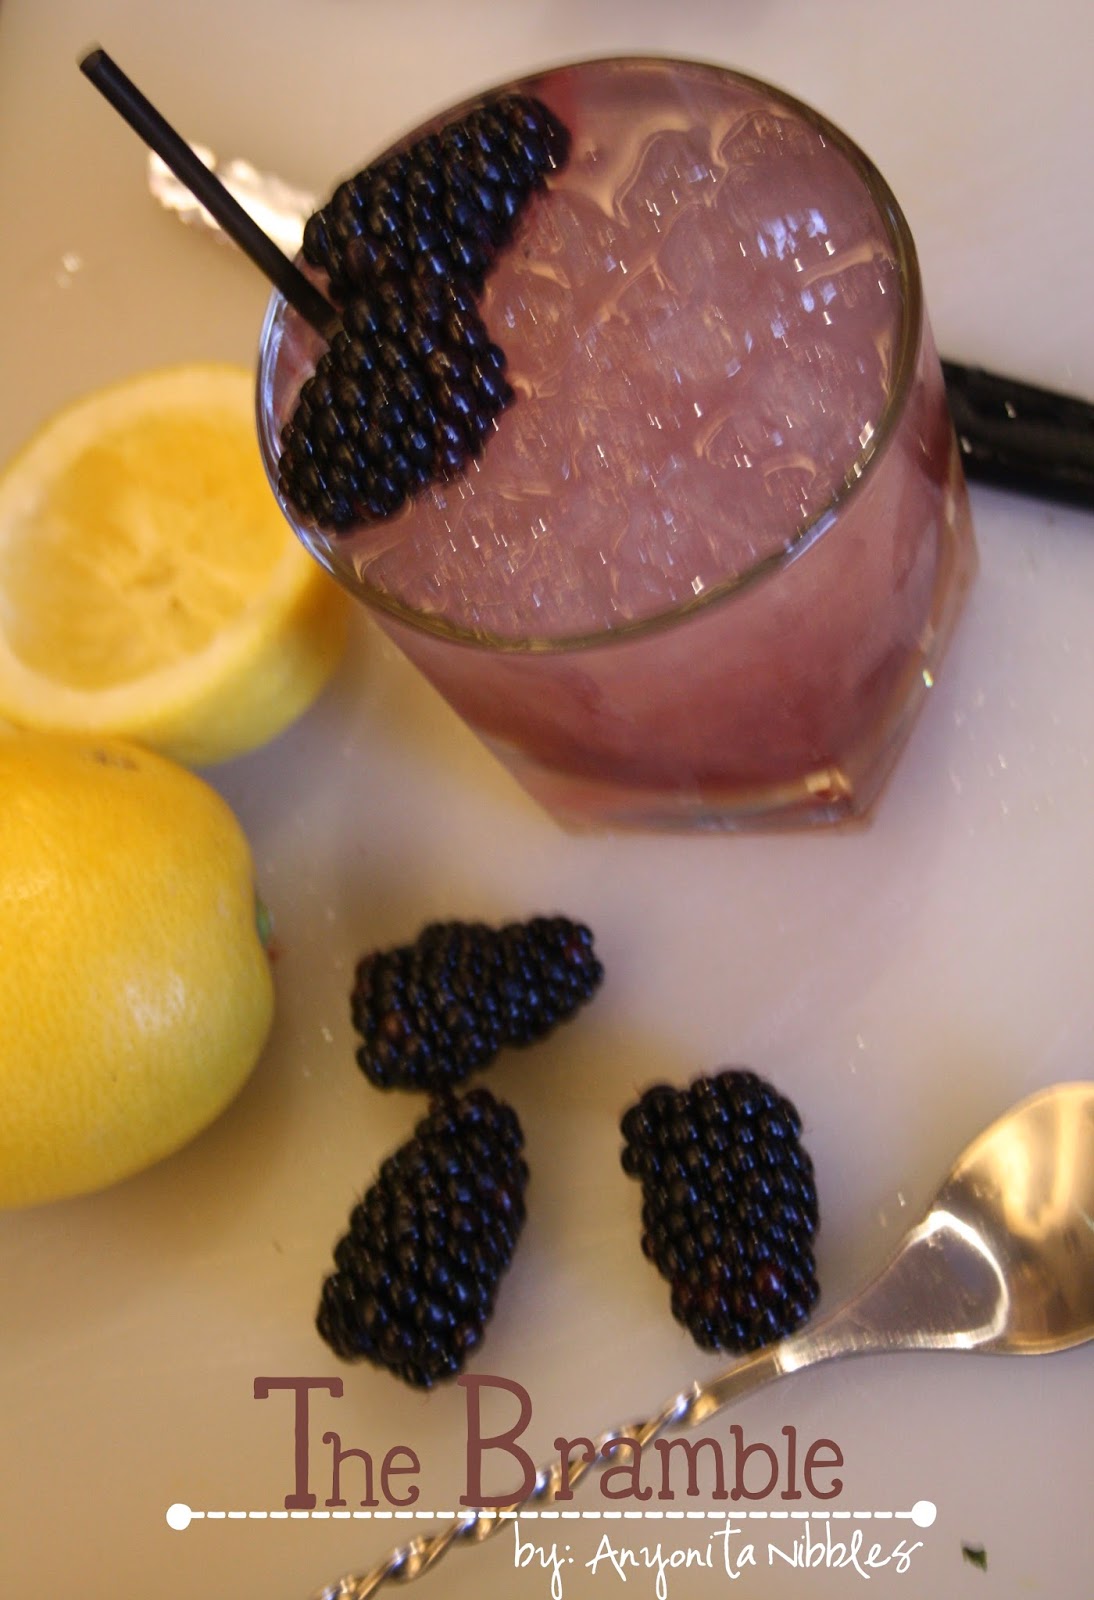 A glass of Bramble made with gin and blackberry liqueur from Anyonita Nibbles